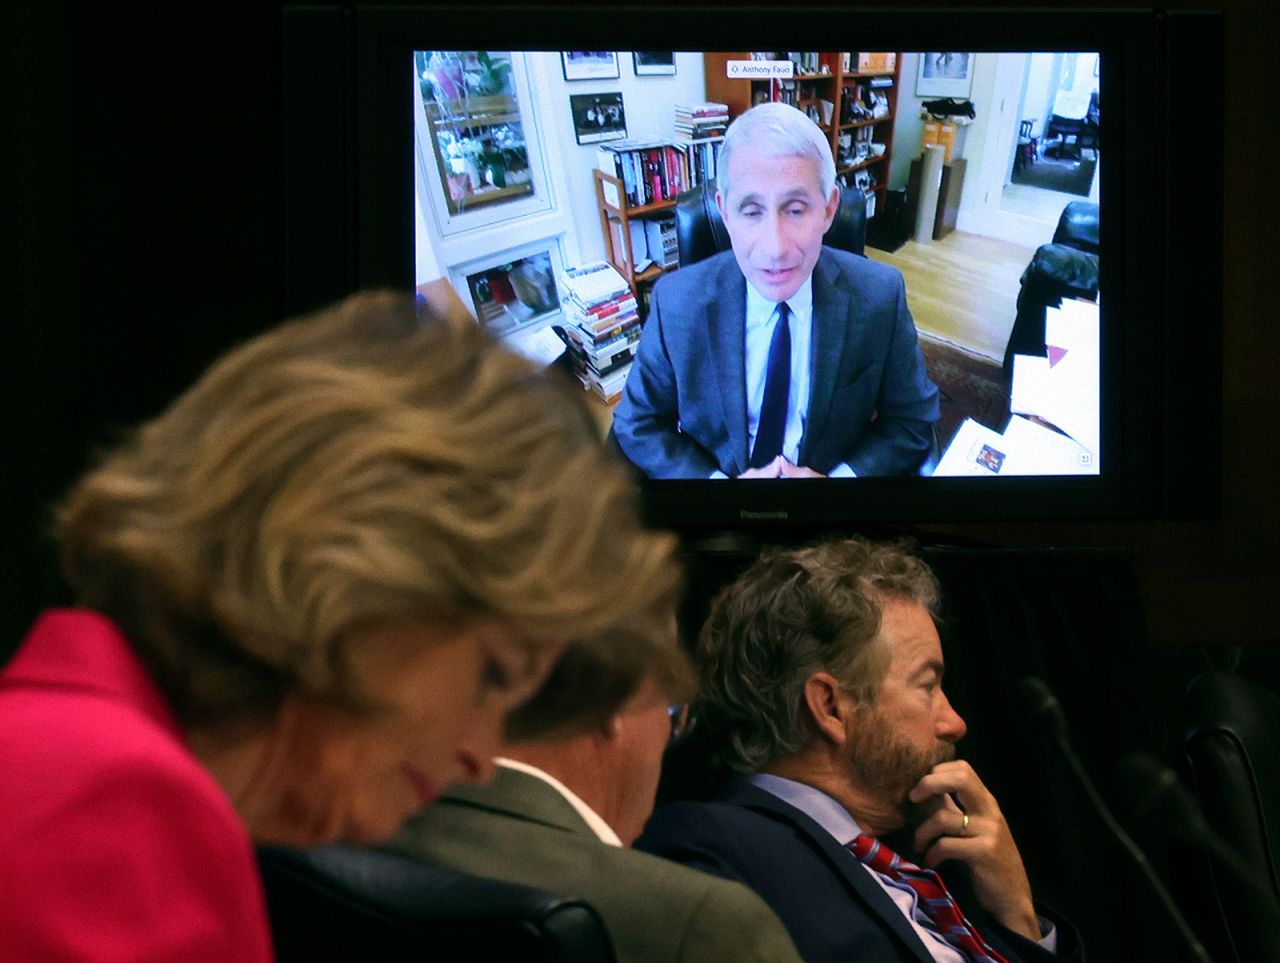 US senators listen to Dr. Anthony Fauci, director of the National Institute of Allergy and Infectious Diseases, as <a href="http://www.cnn.com/2020/05/12/politics/gallery/senate-hearing-remote-witnesses/index.html" target="_blank">he testifies remotely</a> on Tuesday, May 12. Fauci and other health experts testified via teleconference following potential exposures to the novel coronavirus. Fauci <a href="https://www.cnn.com/2020/05/12/politics/anthony-fauci-congress-hearing/index.html" target="_blank">warned senators</a> that states and cities face serious consequences if they open up too quickly.